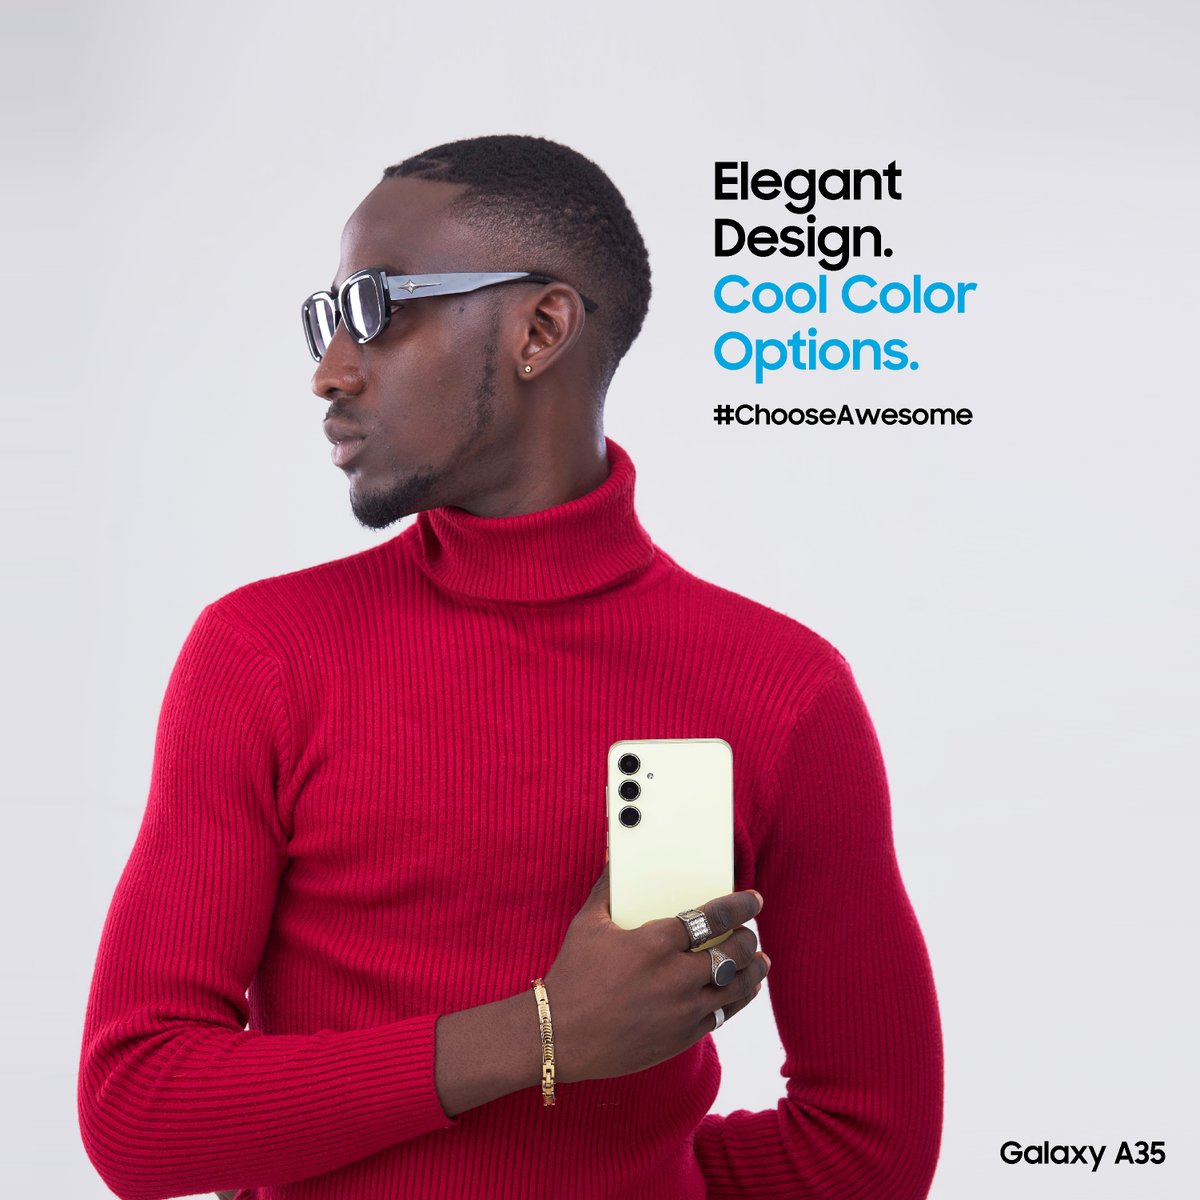 Buy Samsung Galaxy A35 5G (Awesome Iceblue) with 12GB Memory and 256GB Storage, Premium design, Vivid Nightography, 5000mAh battery, 50MP Camera & more. Which awesome color would you buy your Galaxy A35 in ? #ChooseAwesome